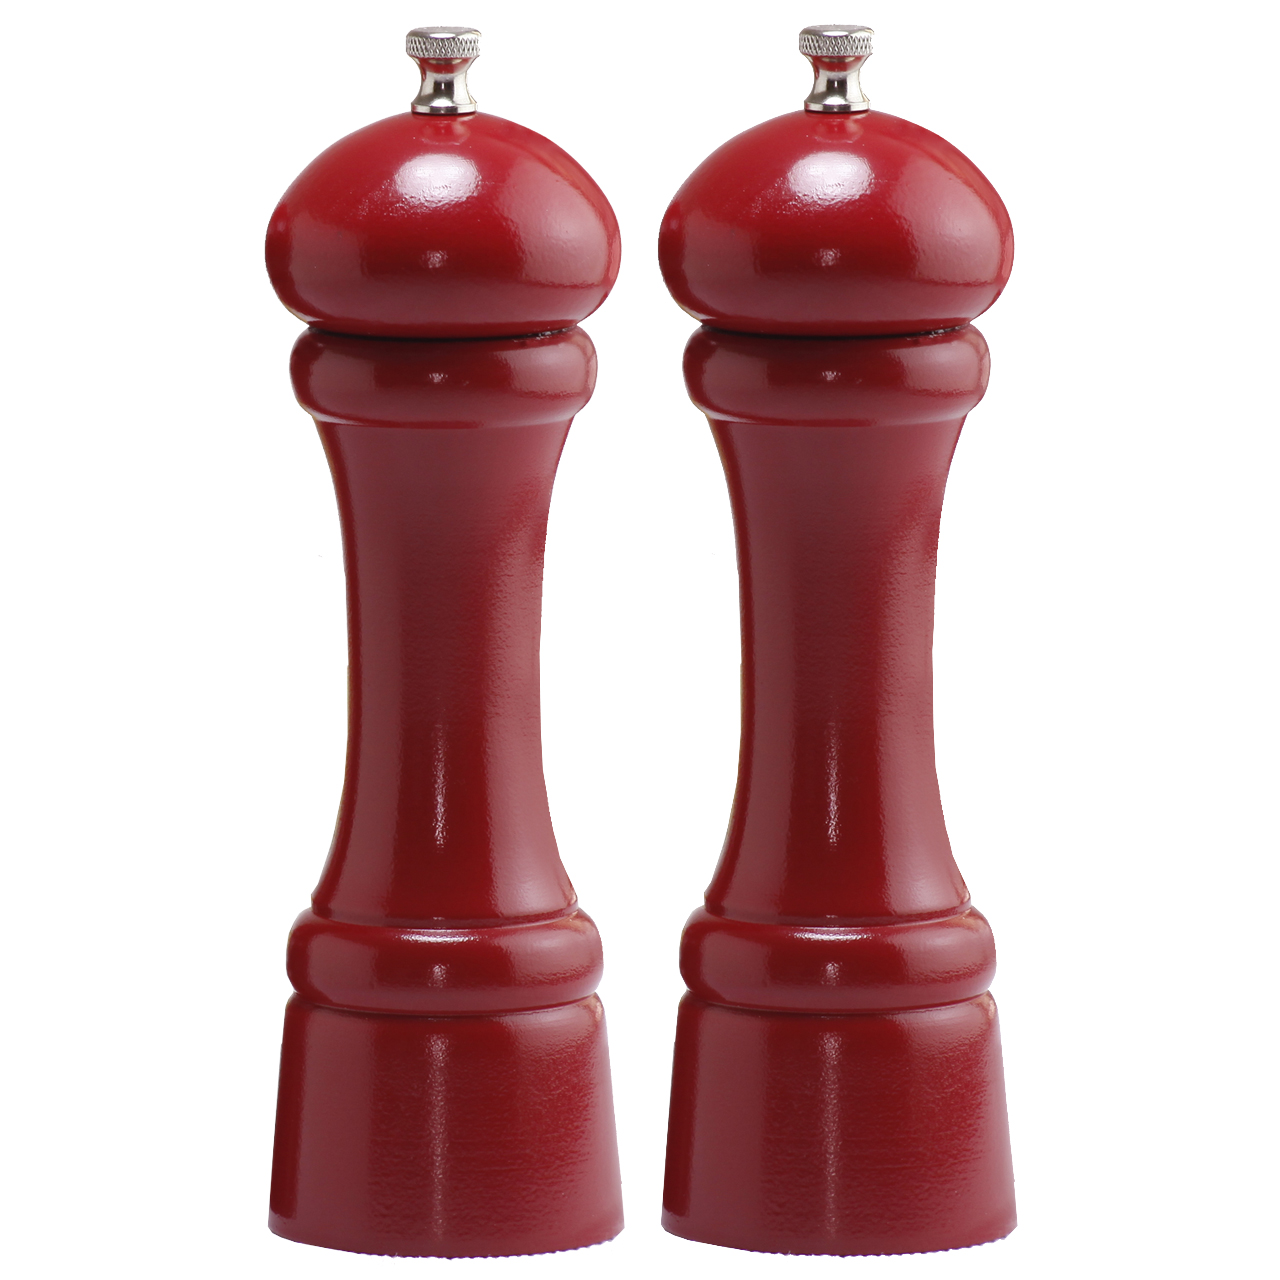 08602 8 In. Candy Apple Red Pepper Mill And Salt Mill Set